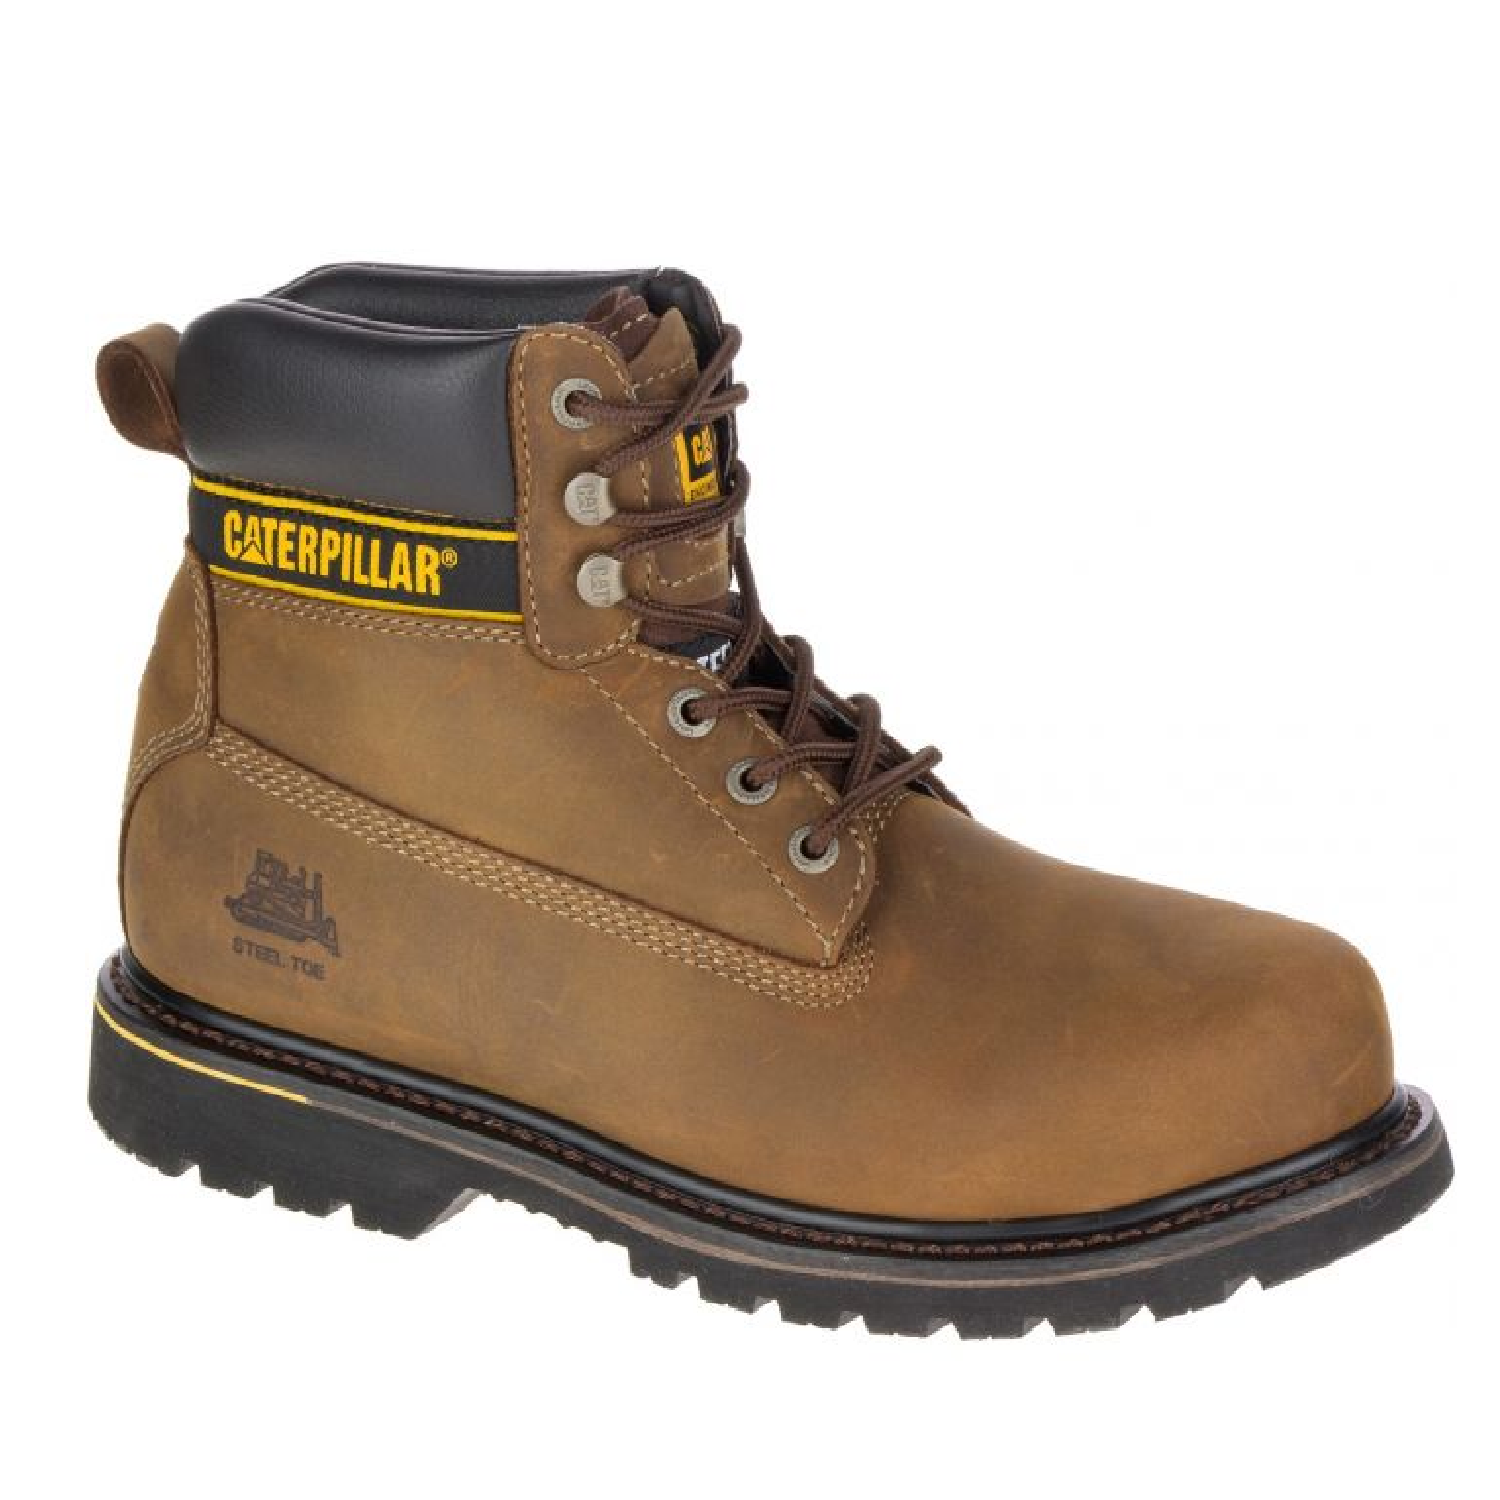 Caterpillar P708029 Men's HOLTON STEEL Toe Safety Boots